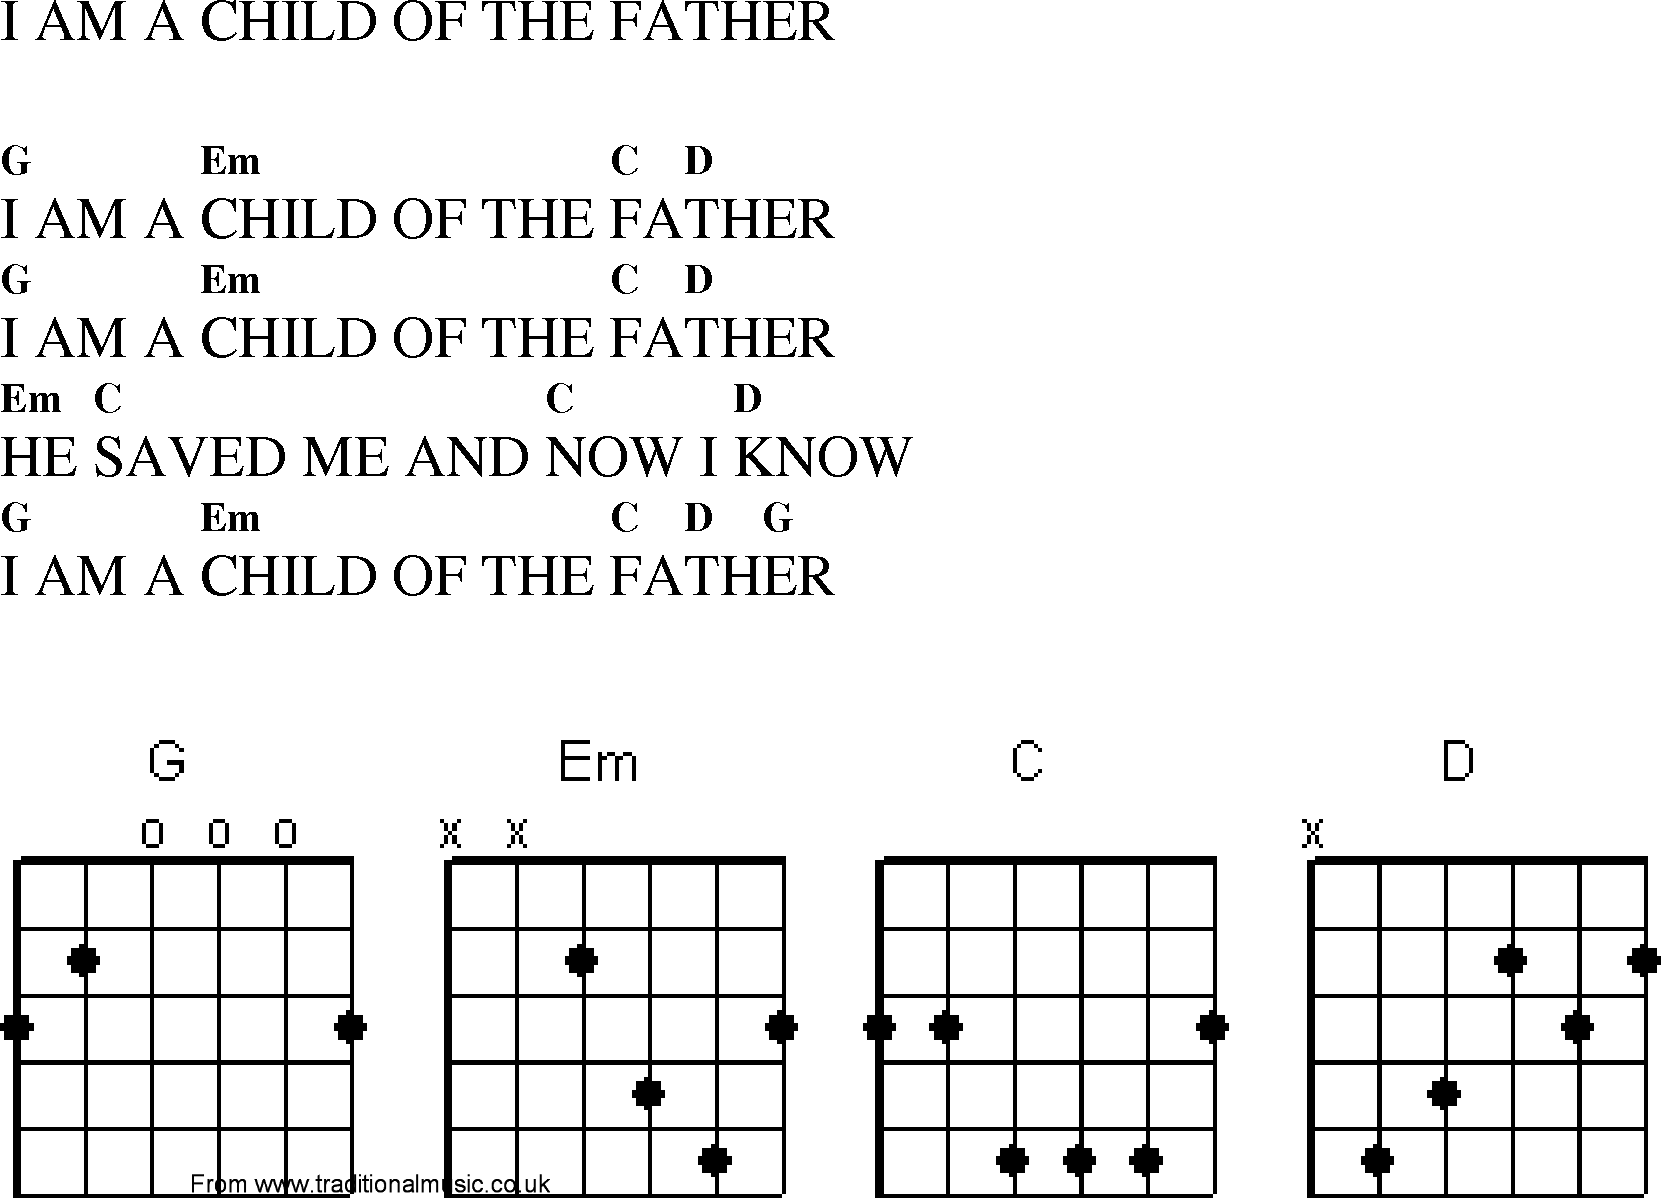 Gospel Song: i_am_a_child_of_the_father, lyrics and chords.